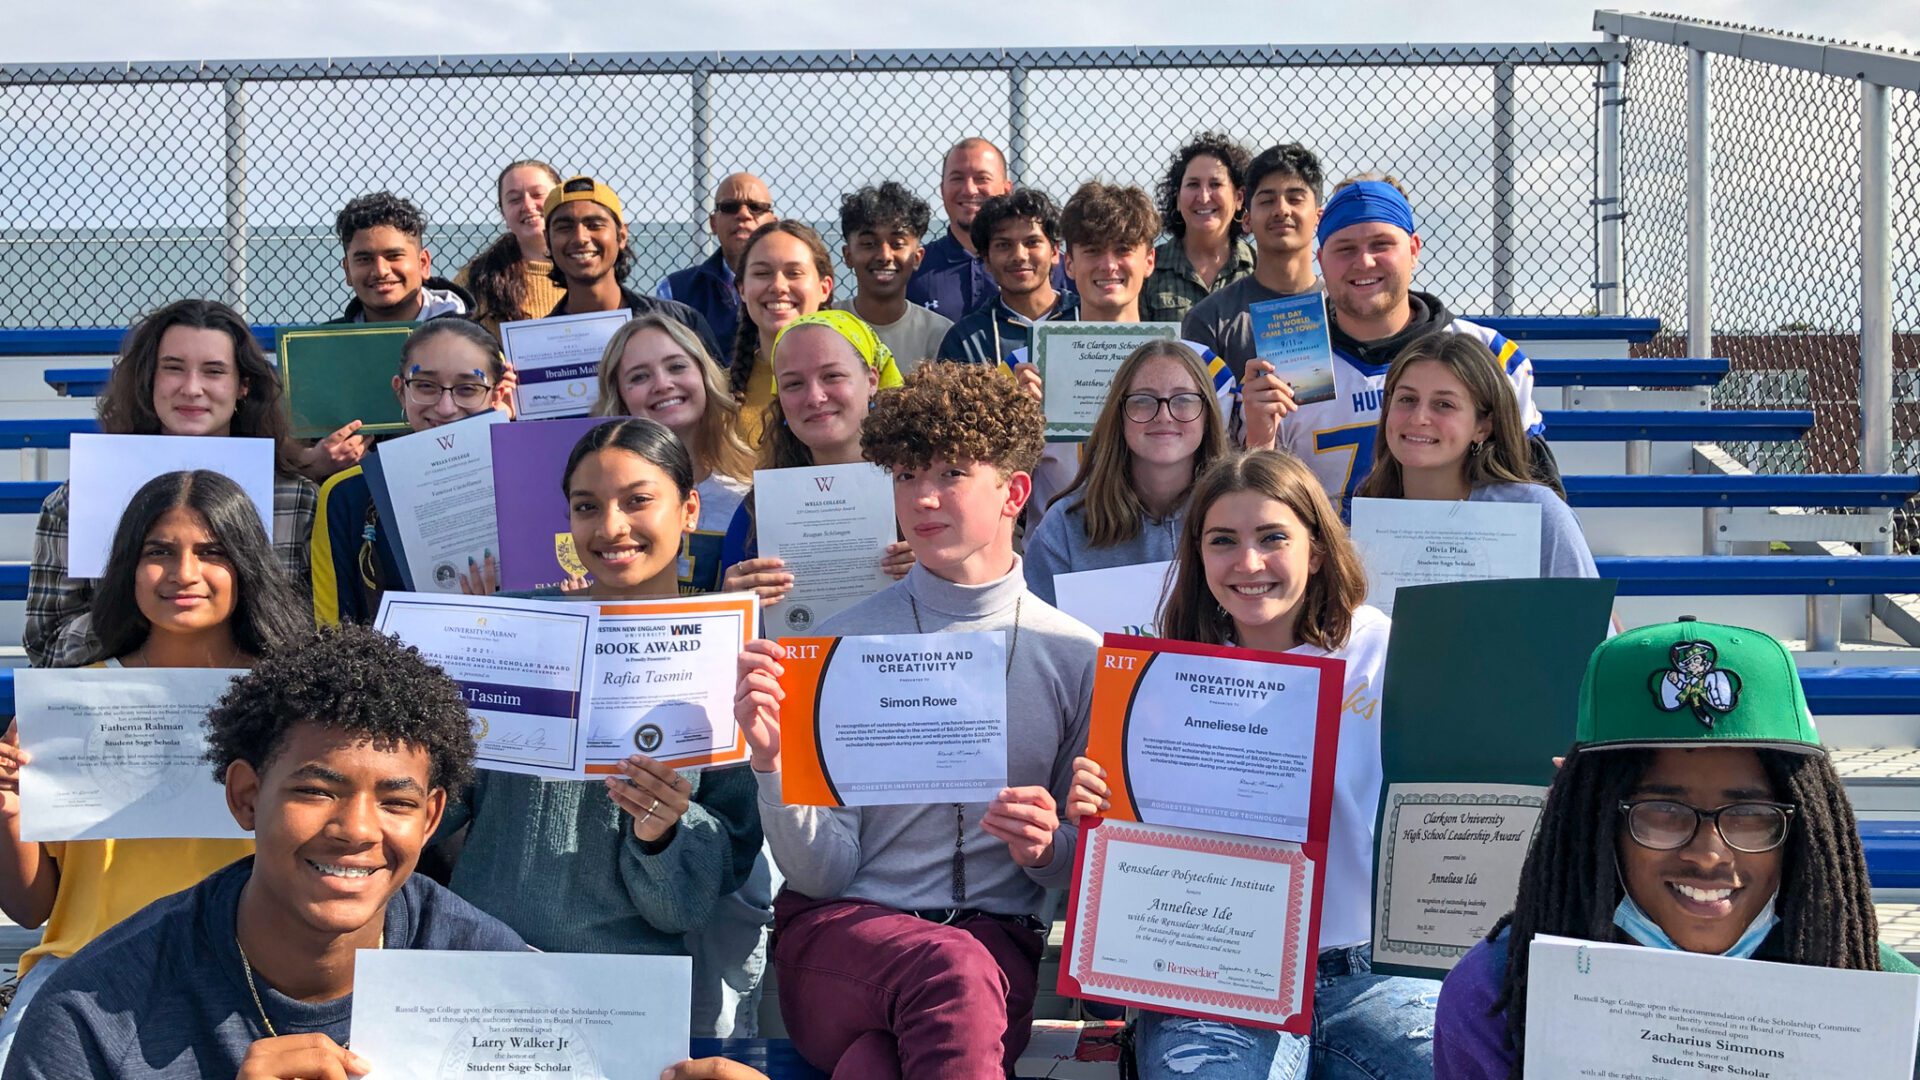 a group of high school students holding up certificates while seated on outdoor bleachers